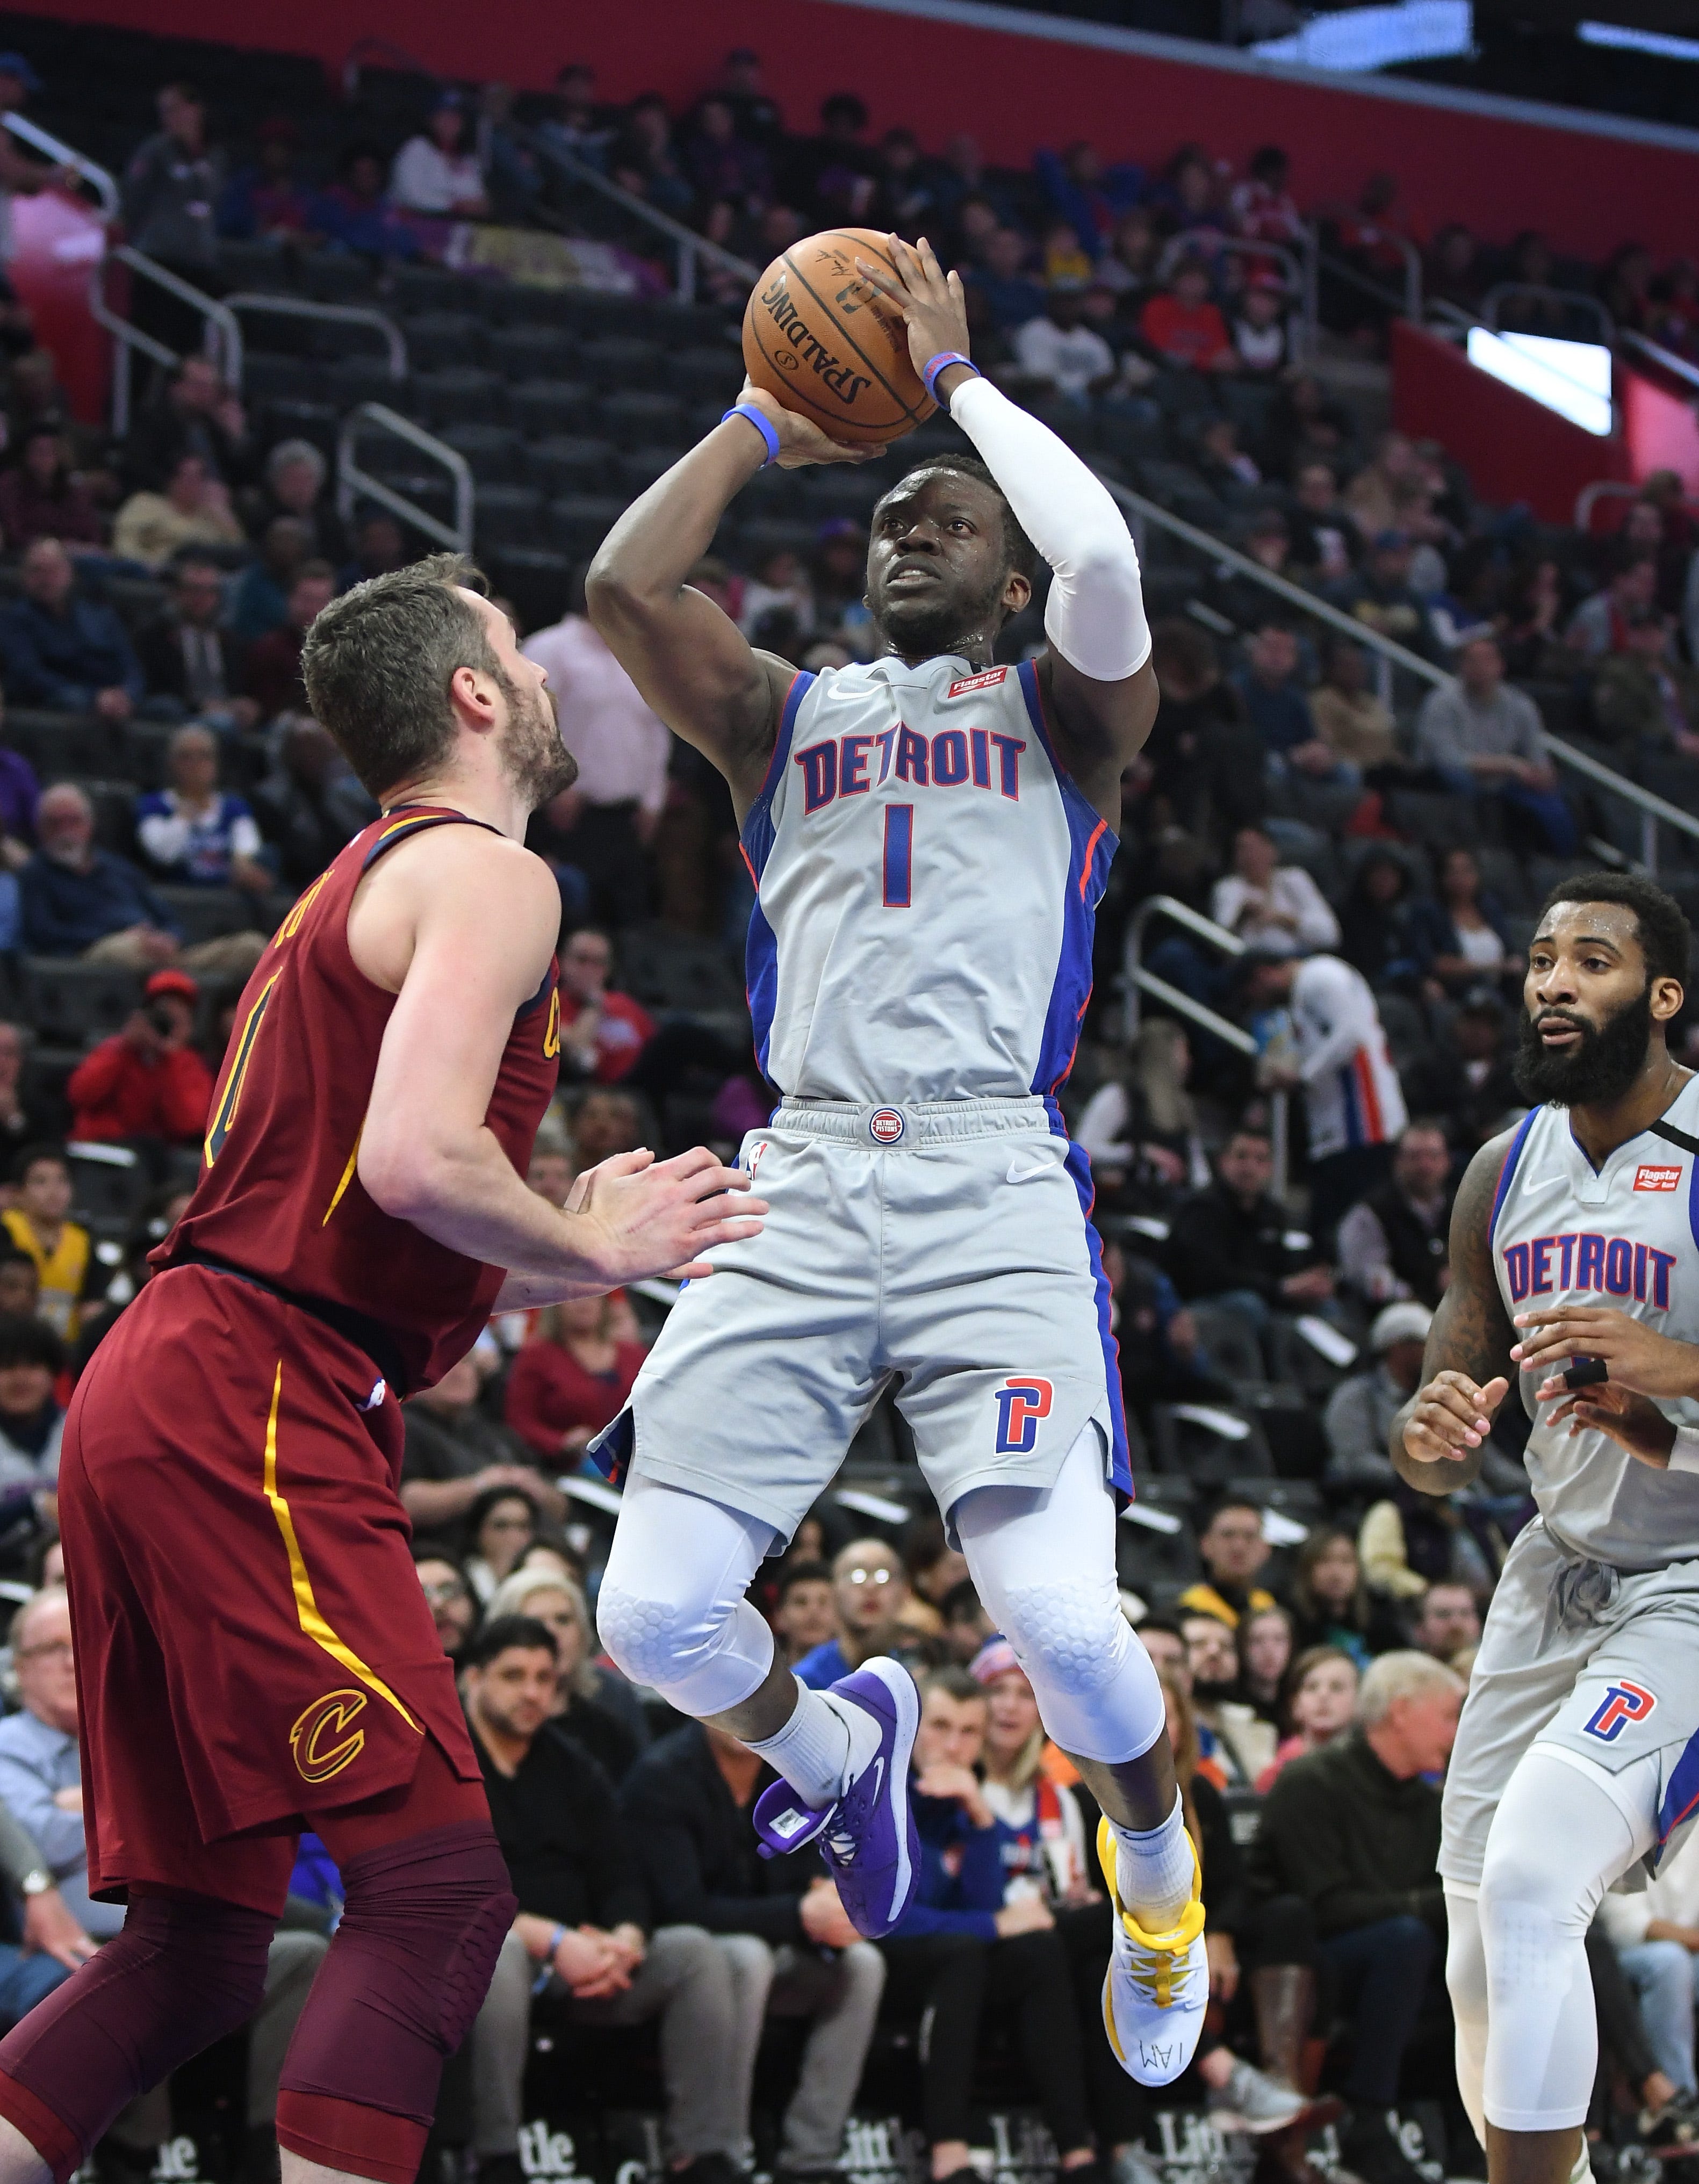 Pistons' Reggie Jackson attacks the basket, putting up a shot in the second quarter.